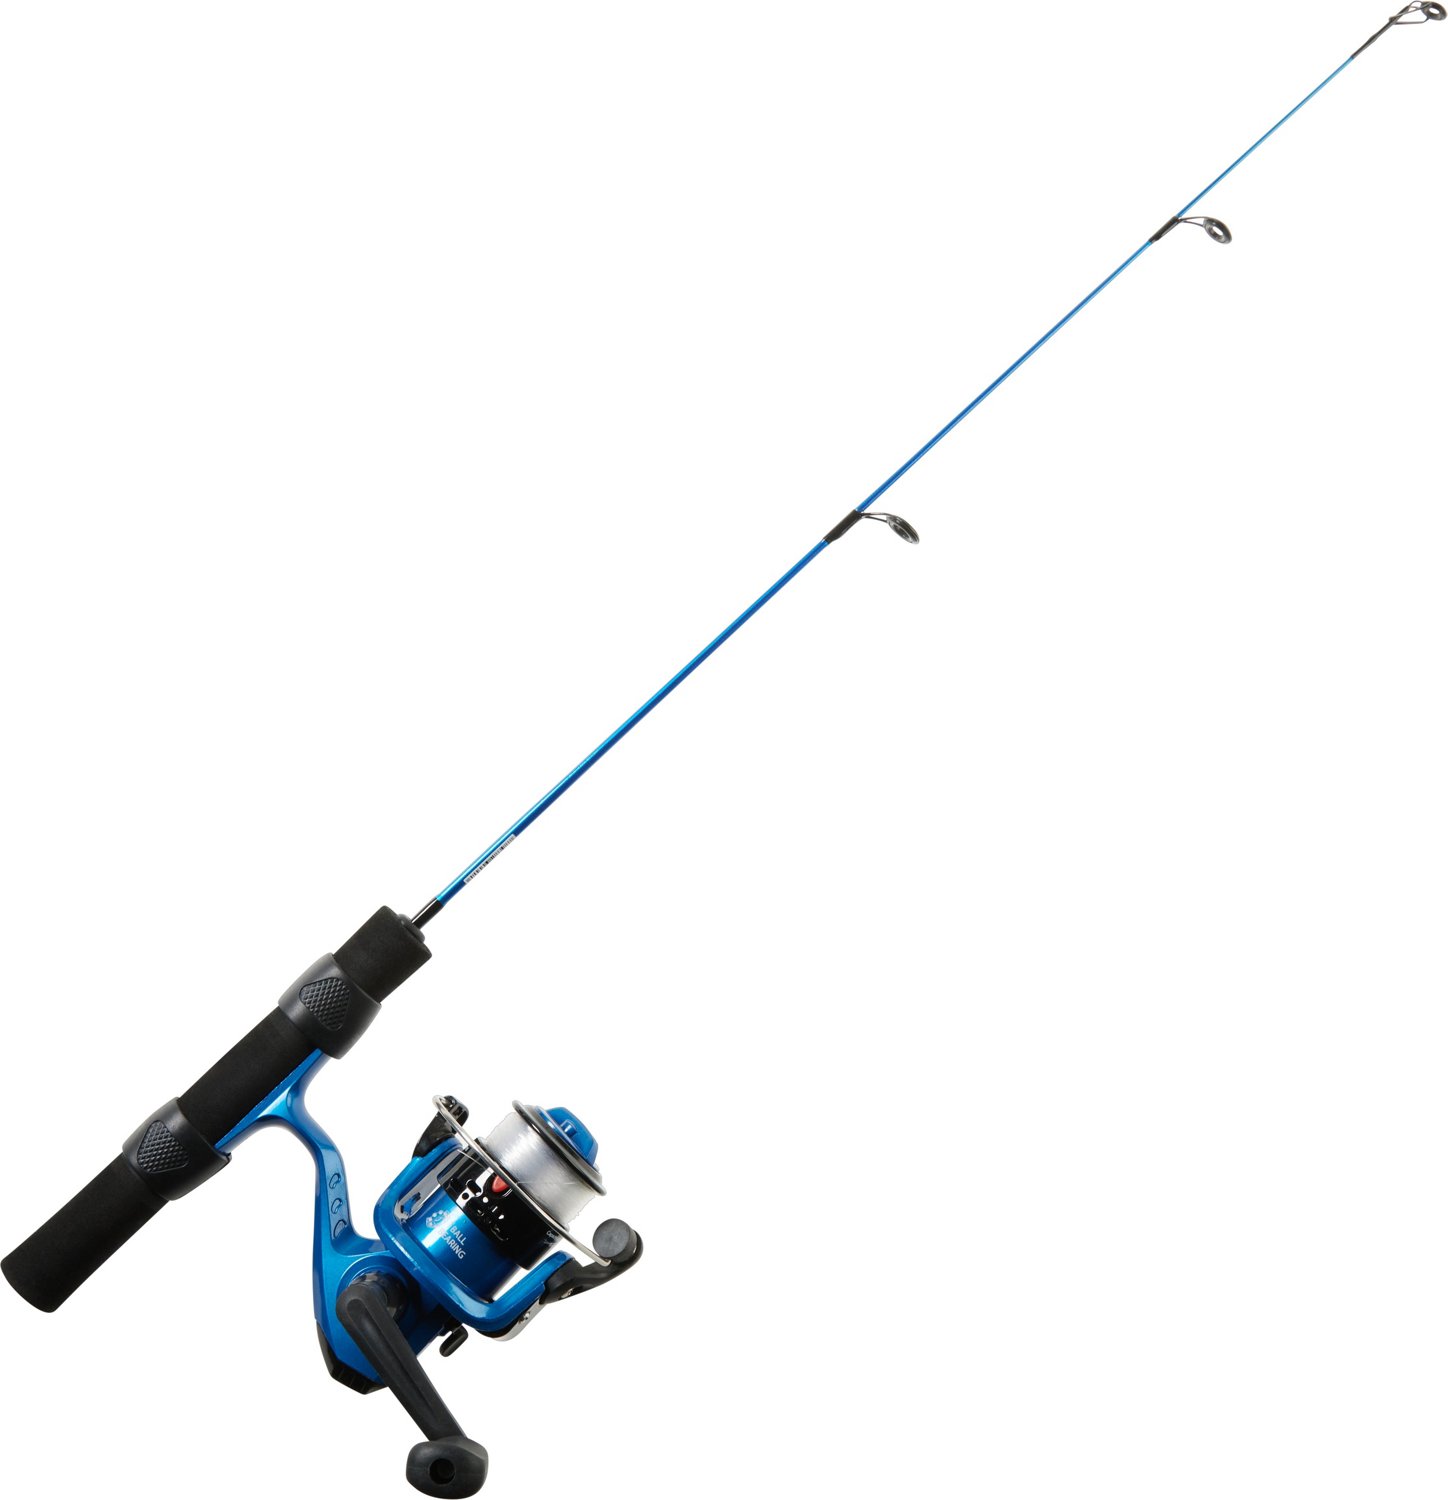 All-New + All Yours, Get the latest Lew's Hack Attack rods, reels + combos  for your best catches ever - available only at Academy., By Academy Sports  + Outdoors